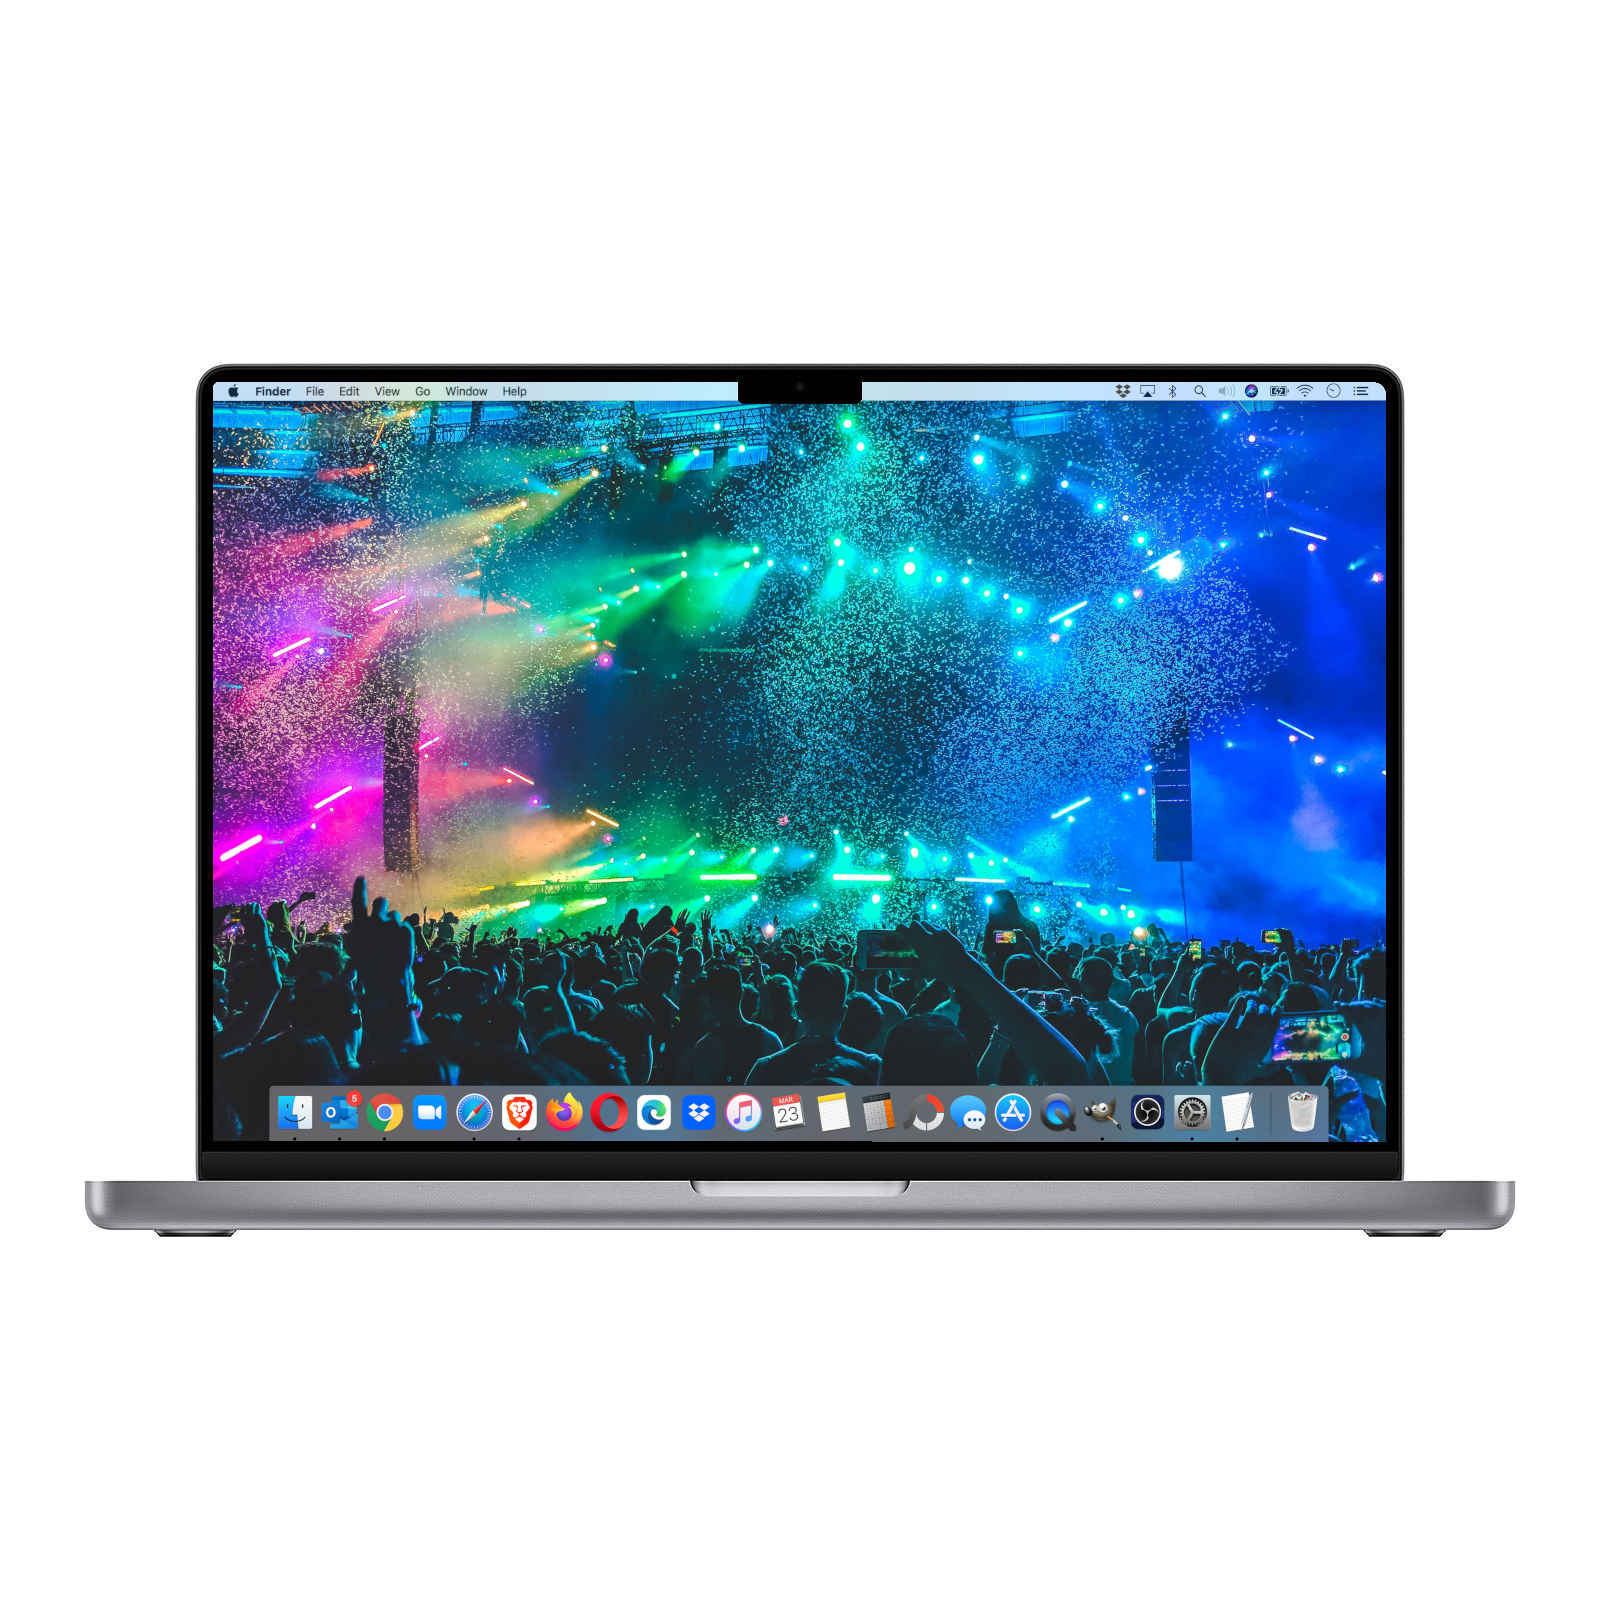 Is The Apple MacBook Pro M1 Max Product of 2021?